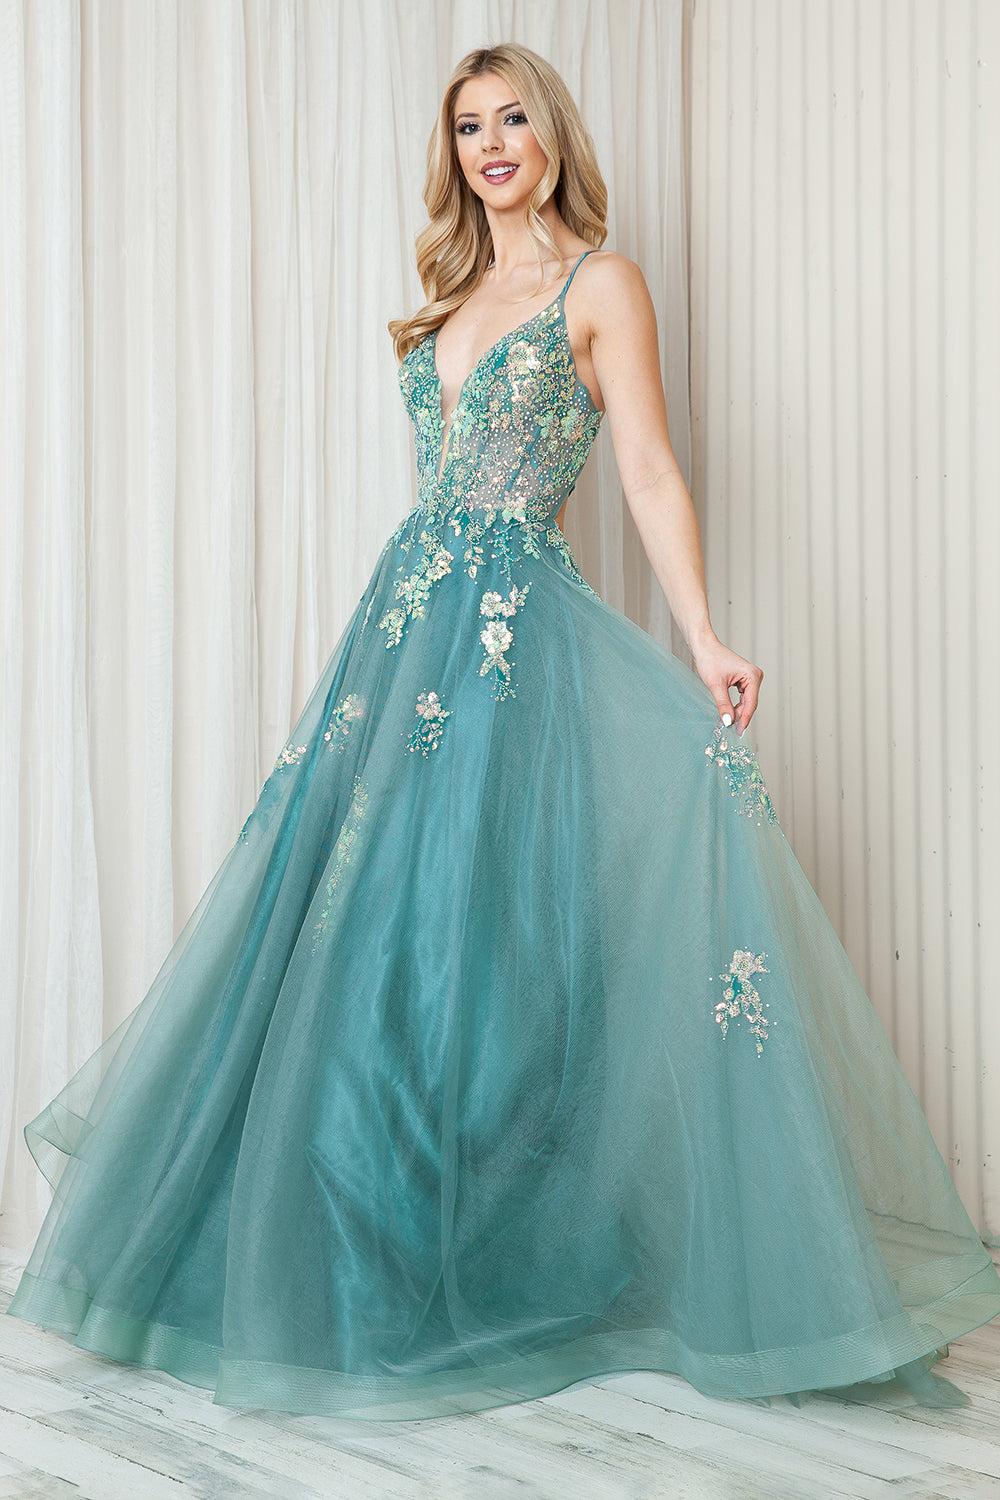 Tulle Skirt Embroidered Lace High Side Slit Long Prom Dress ACTM1003-Prom Dress-smcfashion.com